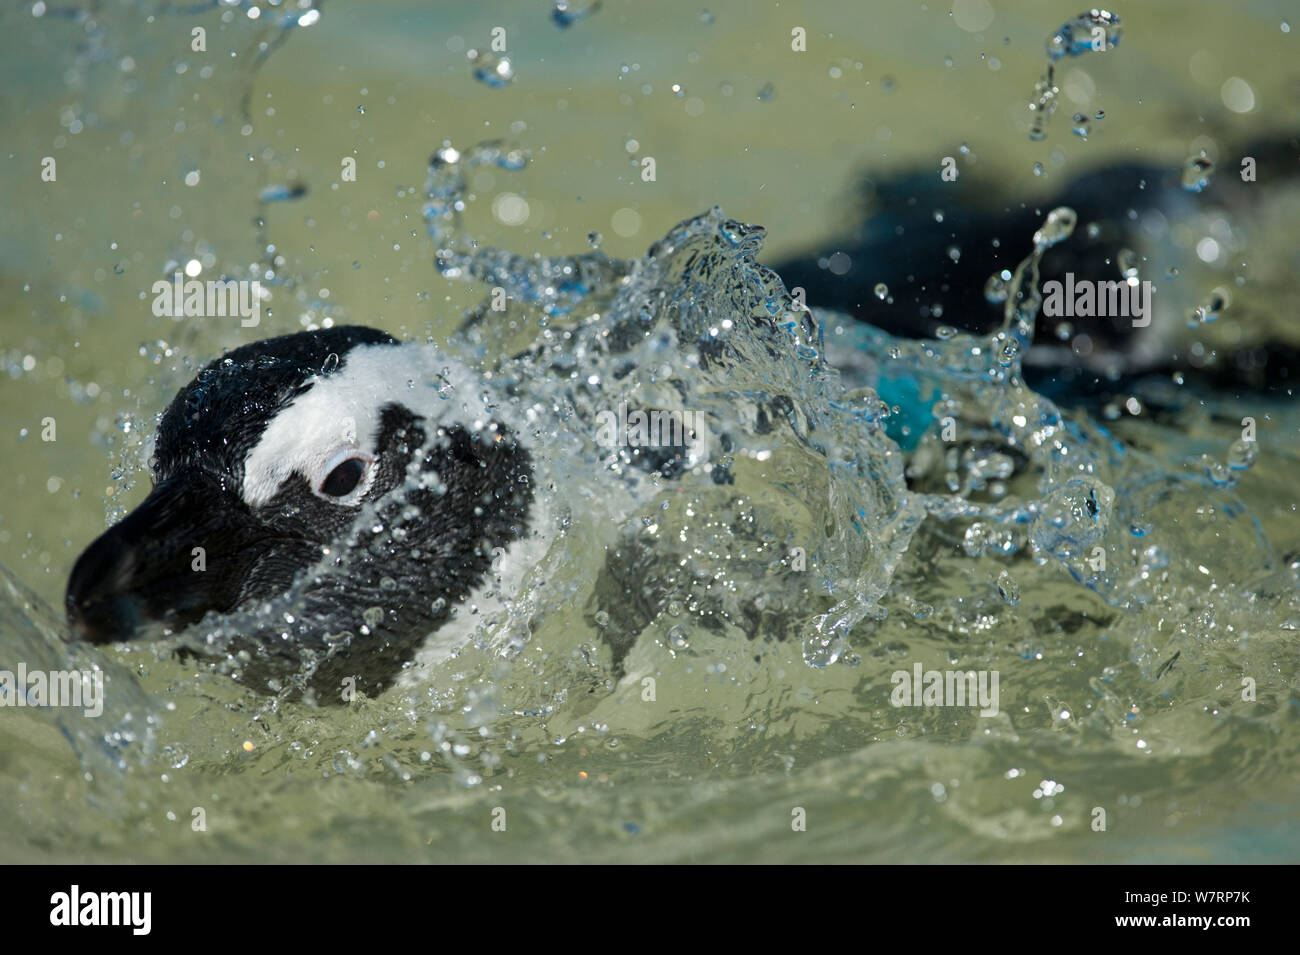 African penguin (Spheniscus demersus) in rehabilitation, swimming in pool, at Southern African Foundation for the Conservation of Coastal Birds (SANCCOB), Cape Town, South Africa. December 2011 Stock Photo